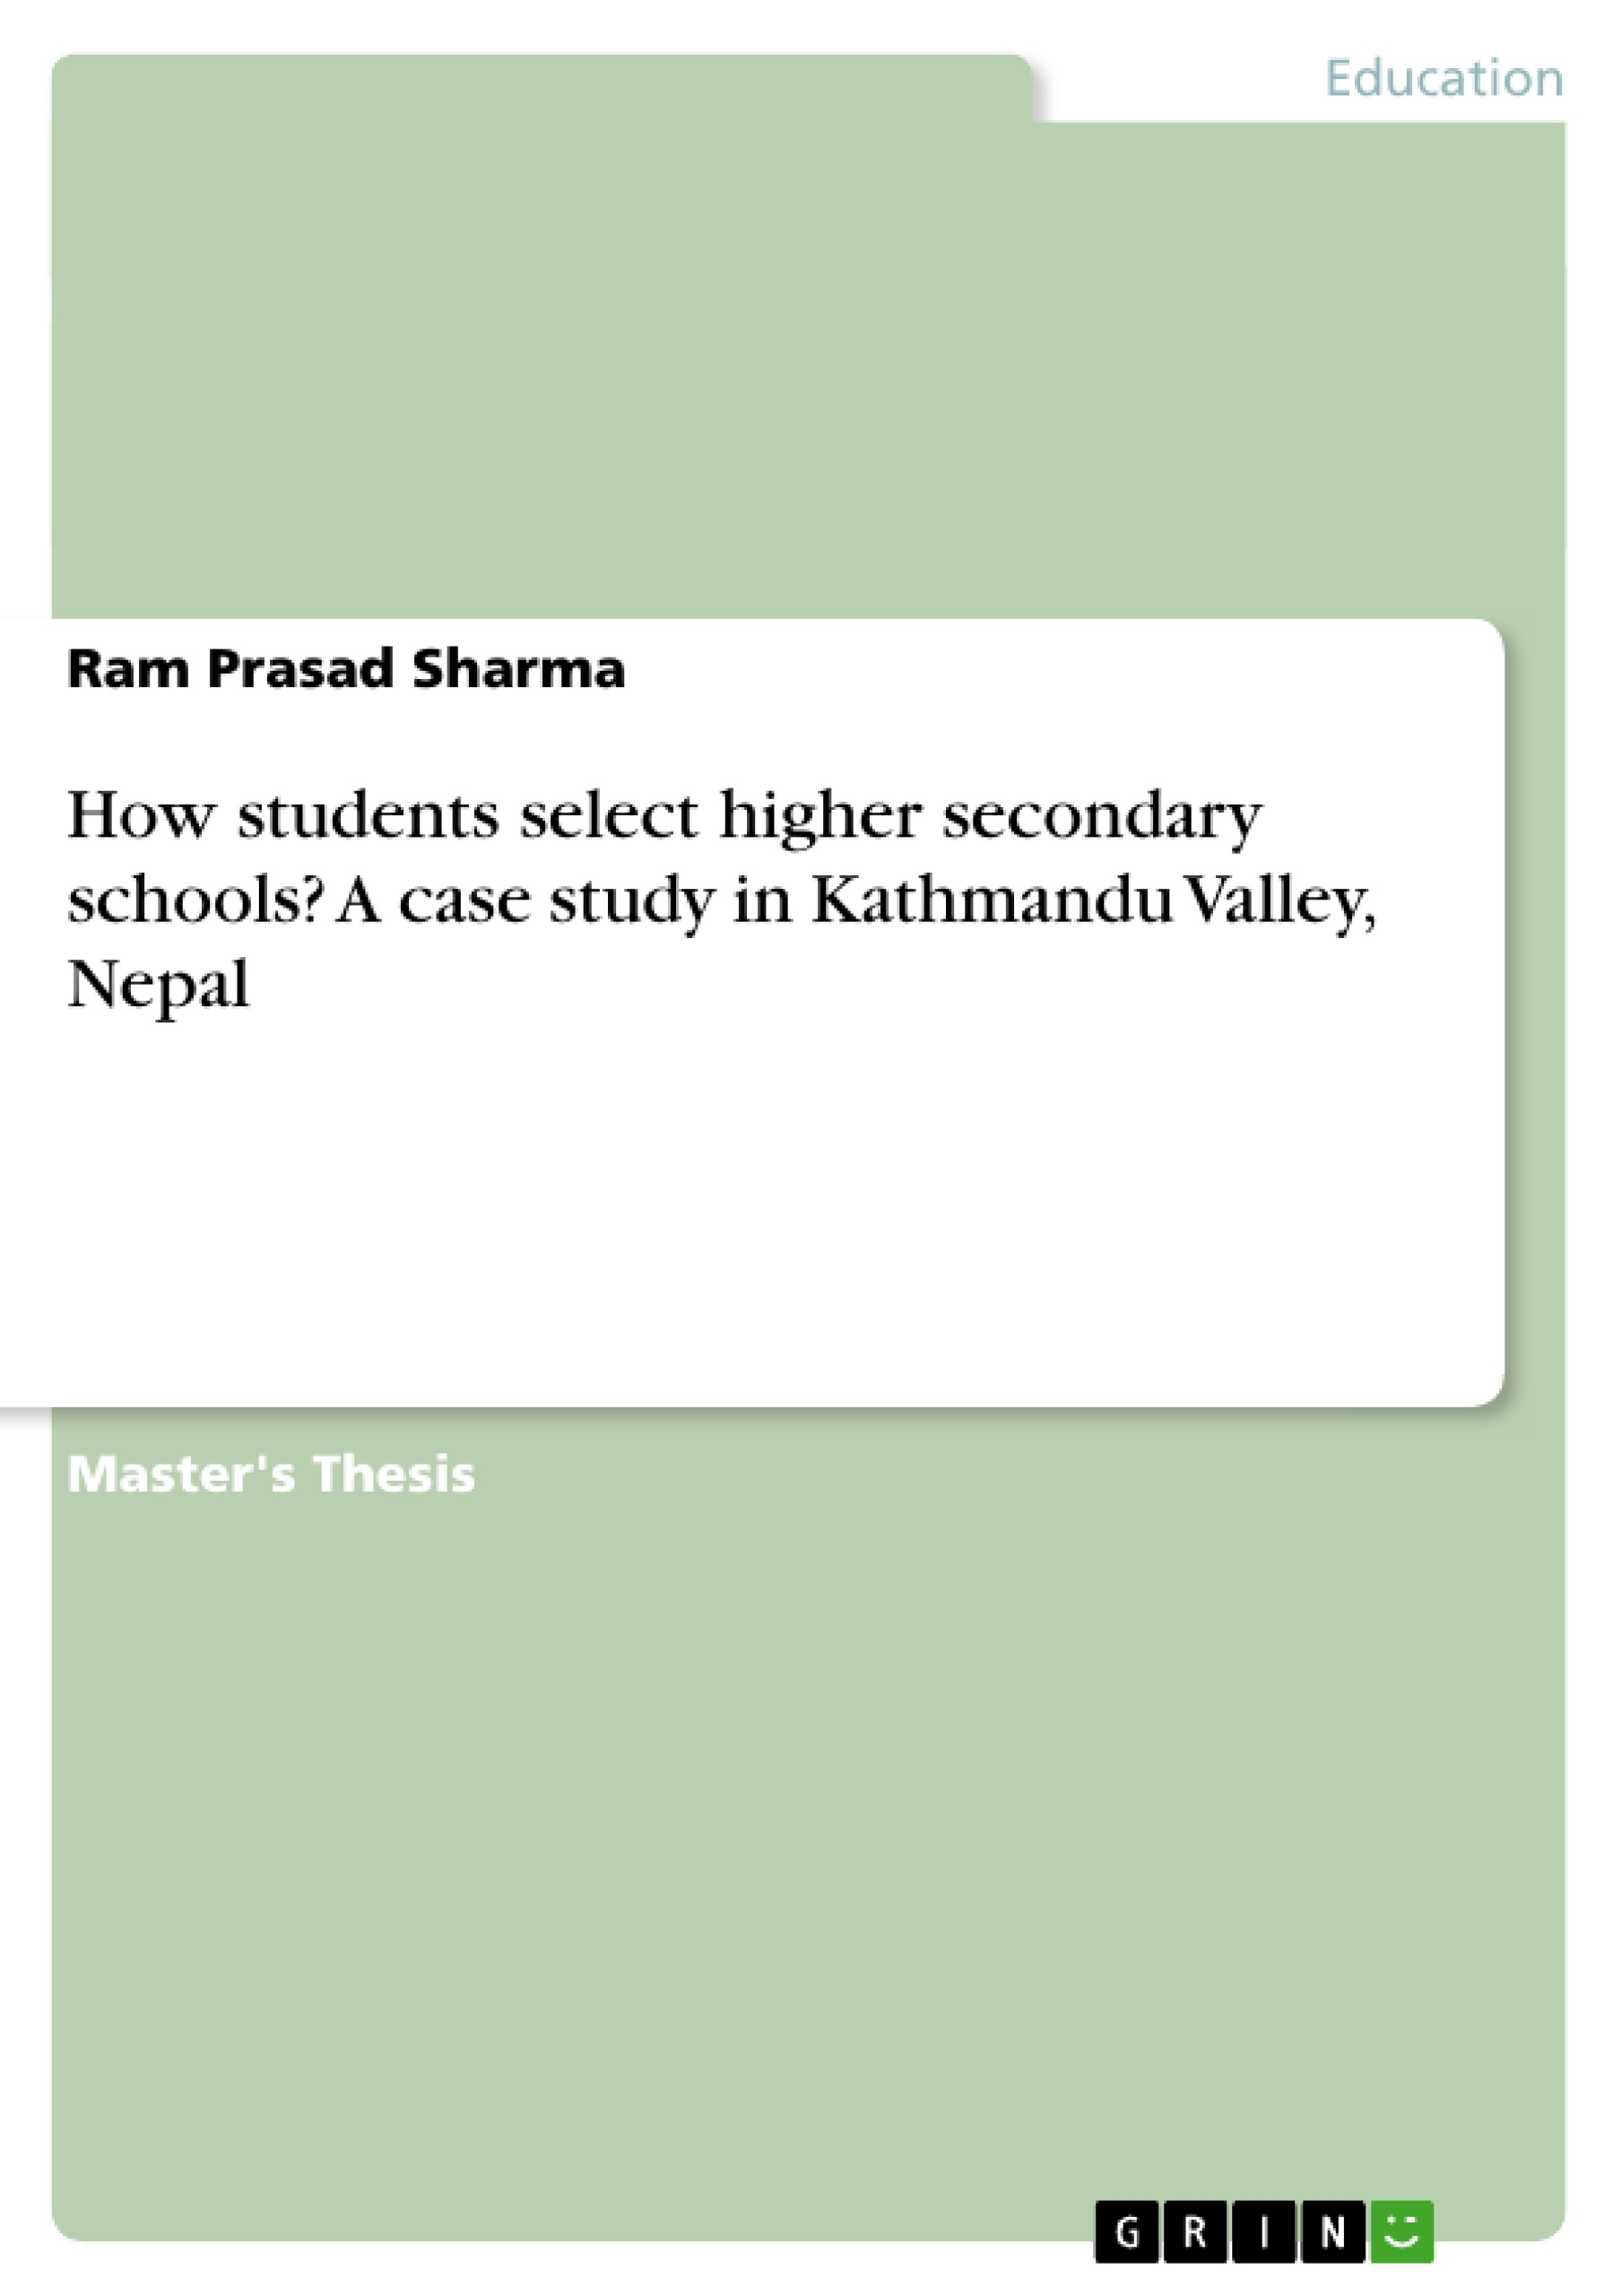 Title: How students select higher secondary schools? A case study in Kathmandu Valley, Nepal